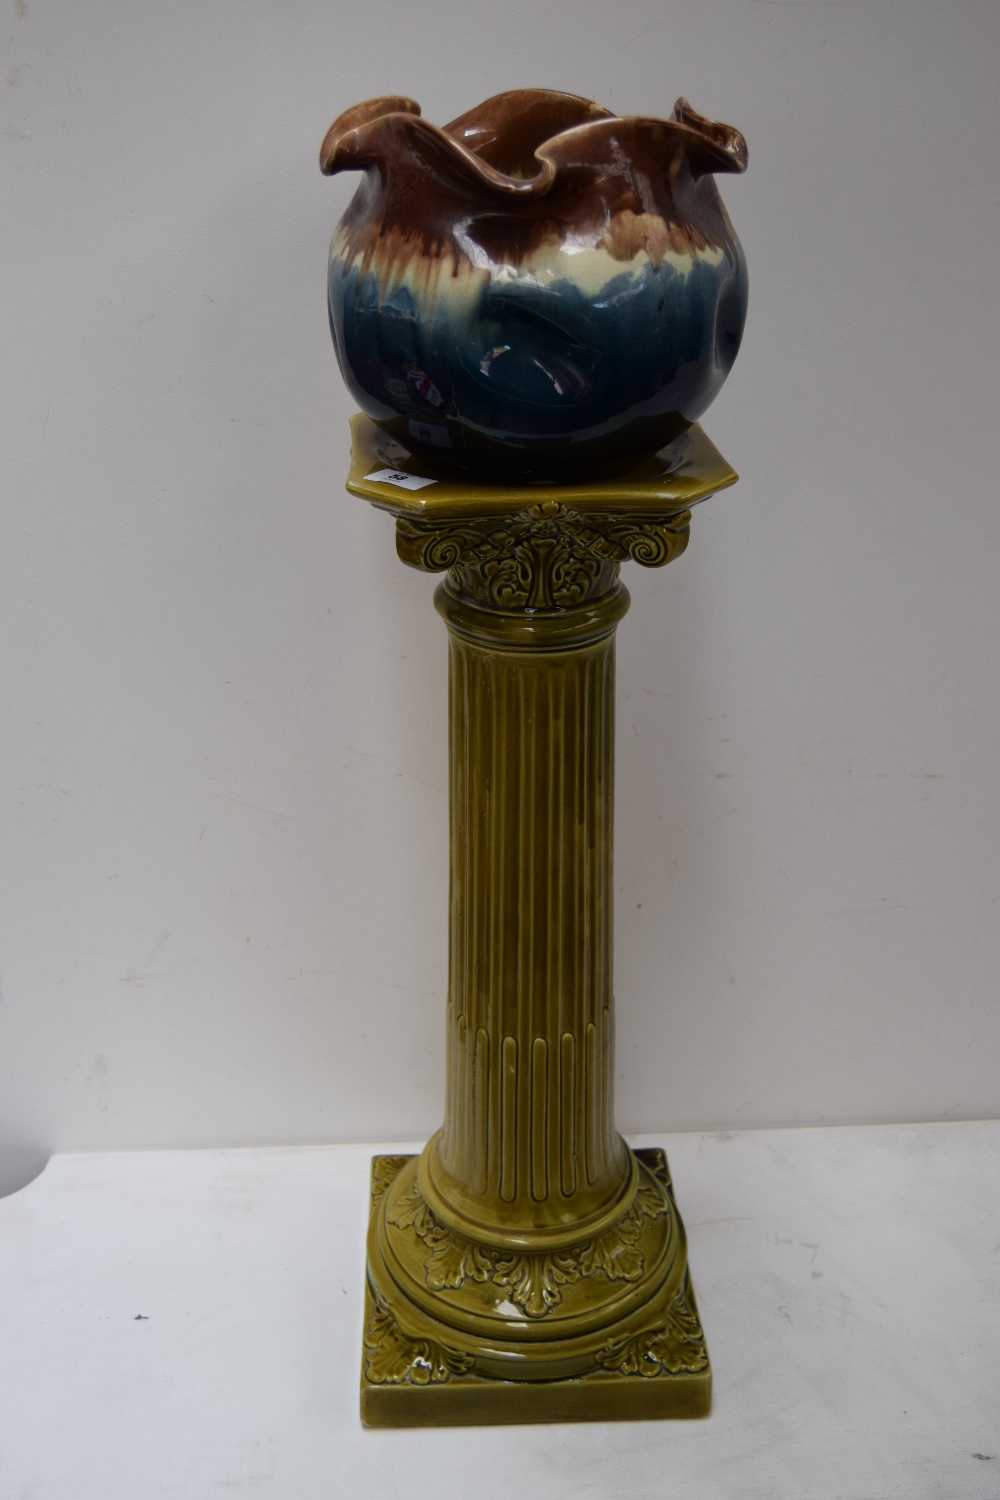 A green glazed ceramic pot stand in the form of a classical fluted column together with a brown and